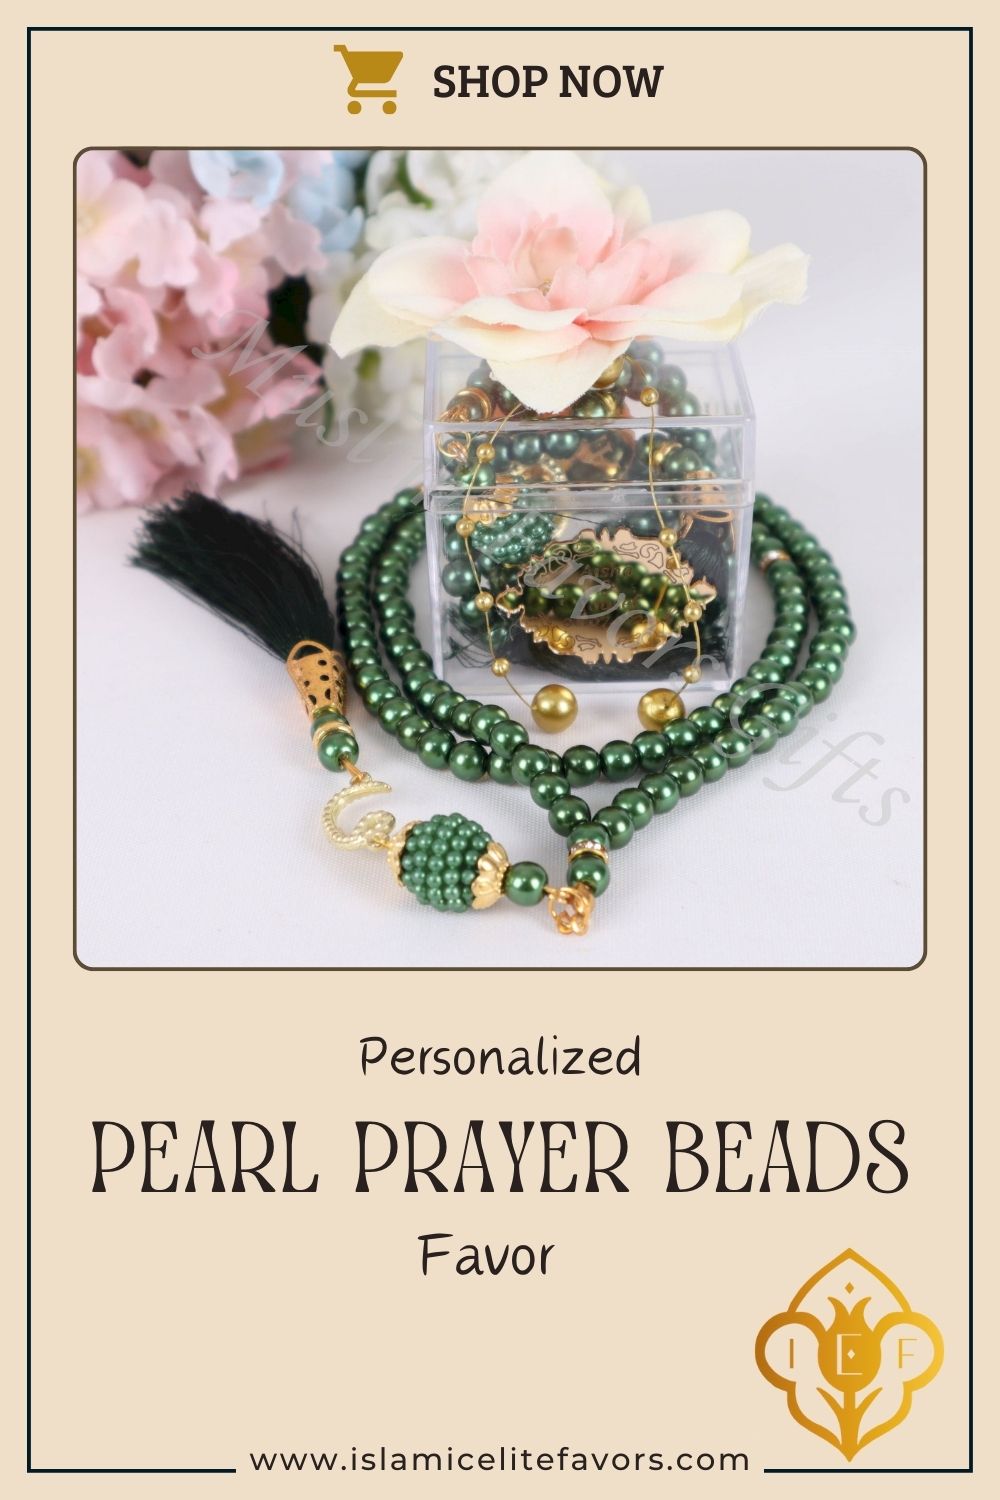 Personalized Pearl Prayer Beads Tasbeeh Masbaha Islamic Wedding Gift - Islamic Elite Favors is a handmade gift shop offering a wide variety of unique and personalized gifts for all occasions. Whether you're looking for the perfect Ramadan, Eid, Hajj, wedding gift or something special for a birthday, baby shower or anniversary, we have something for everyone. High quality, made with love.